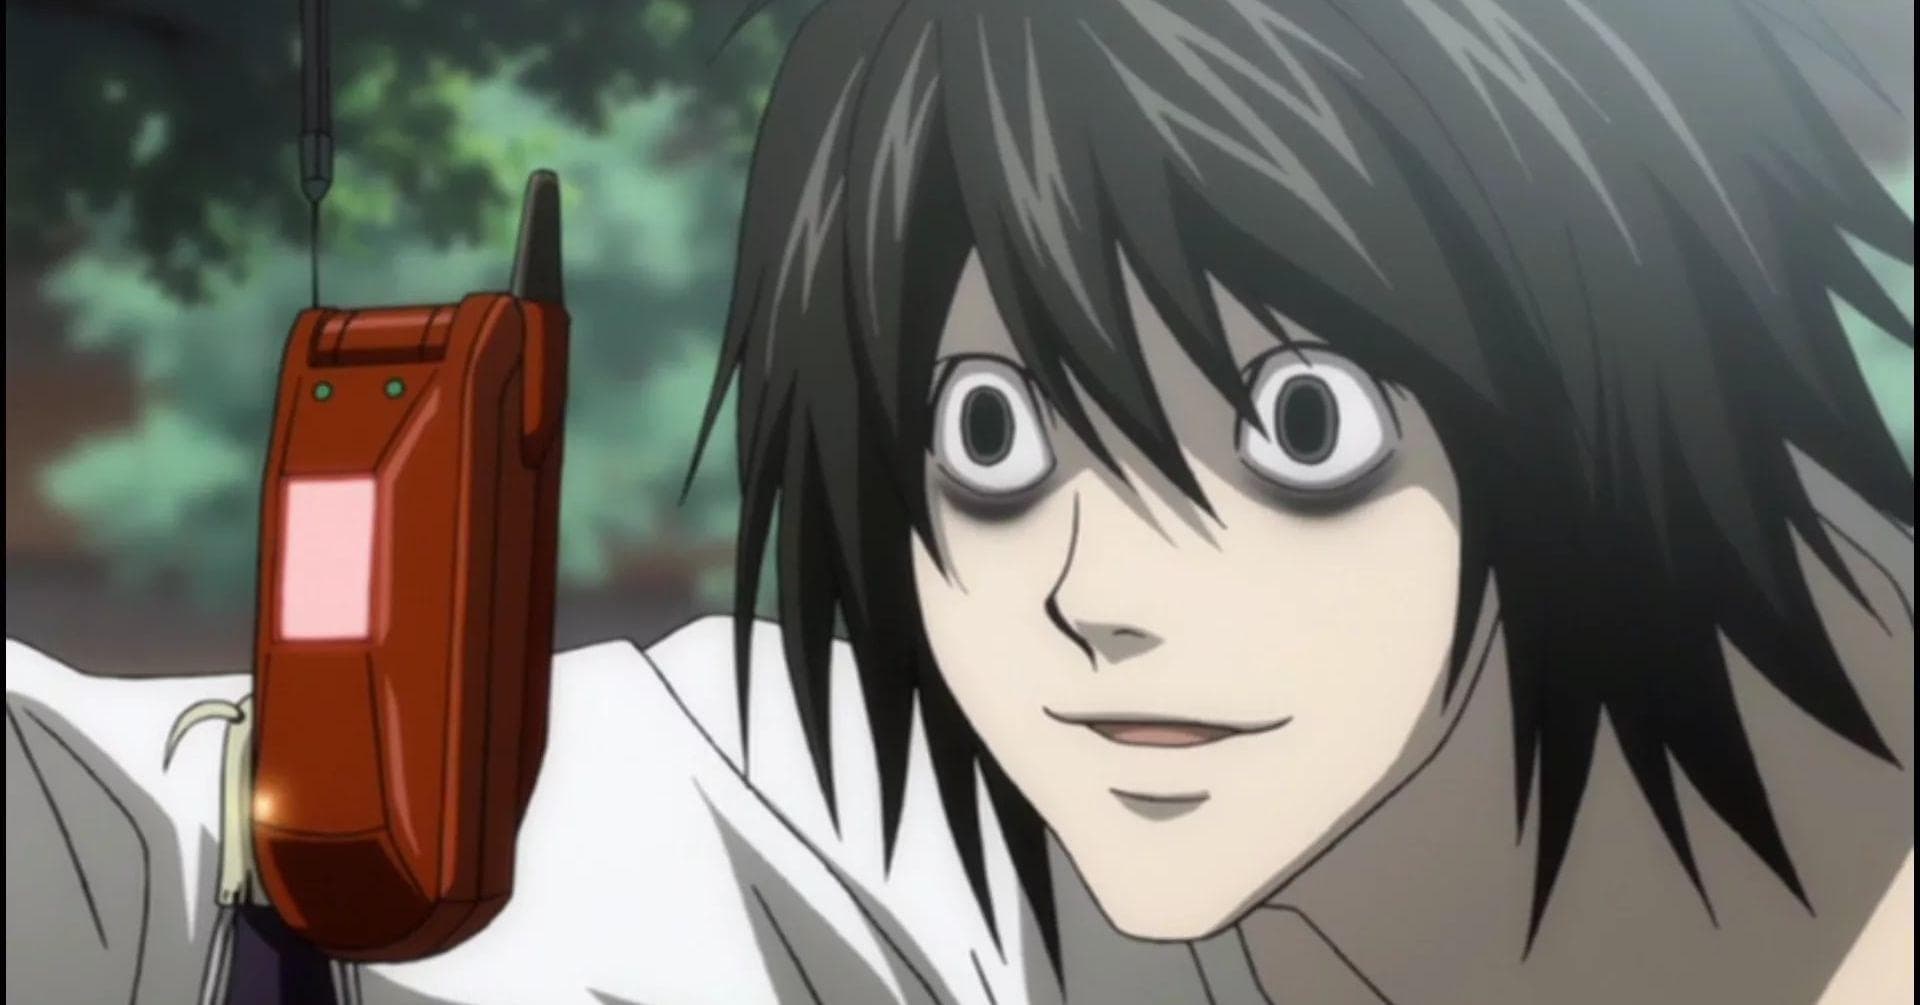 List of 10+ Anime Like Death Note That Are Similar in Theme